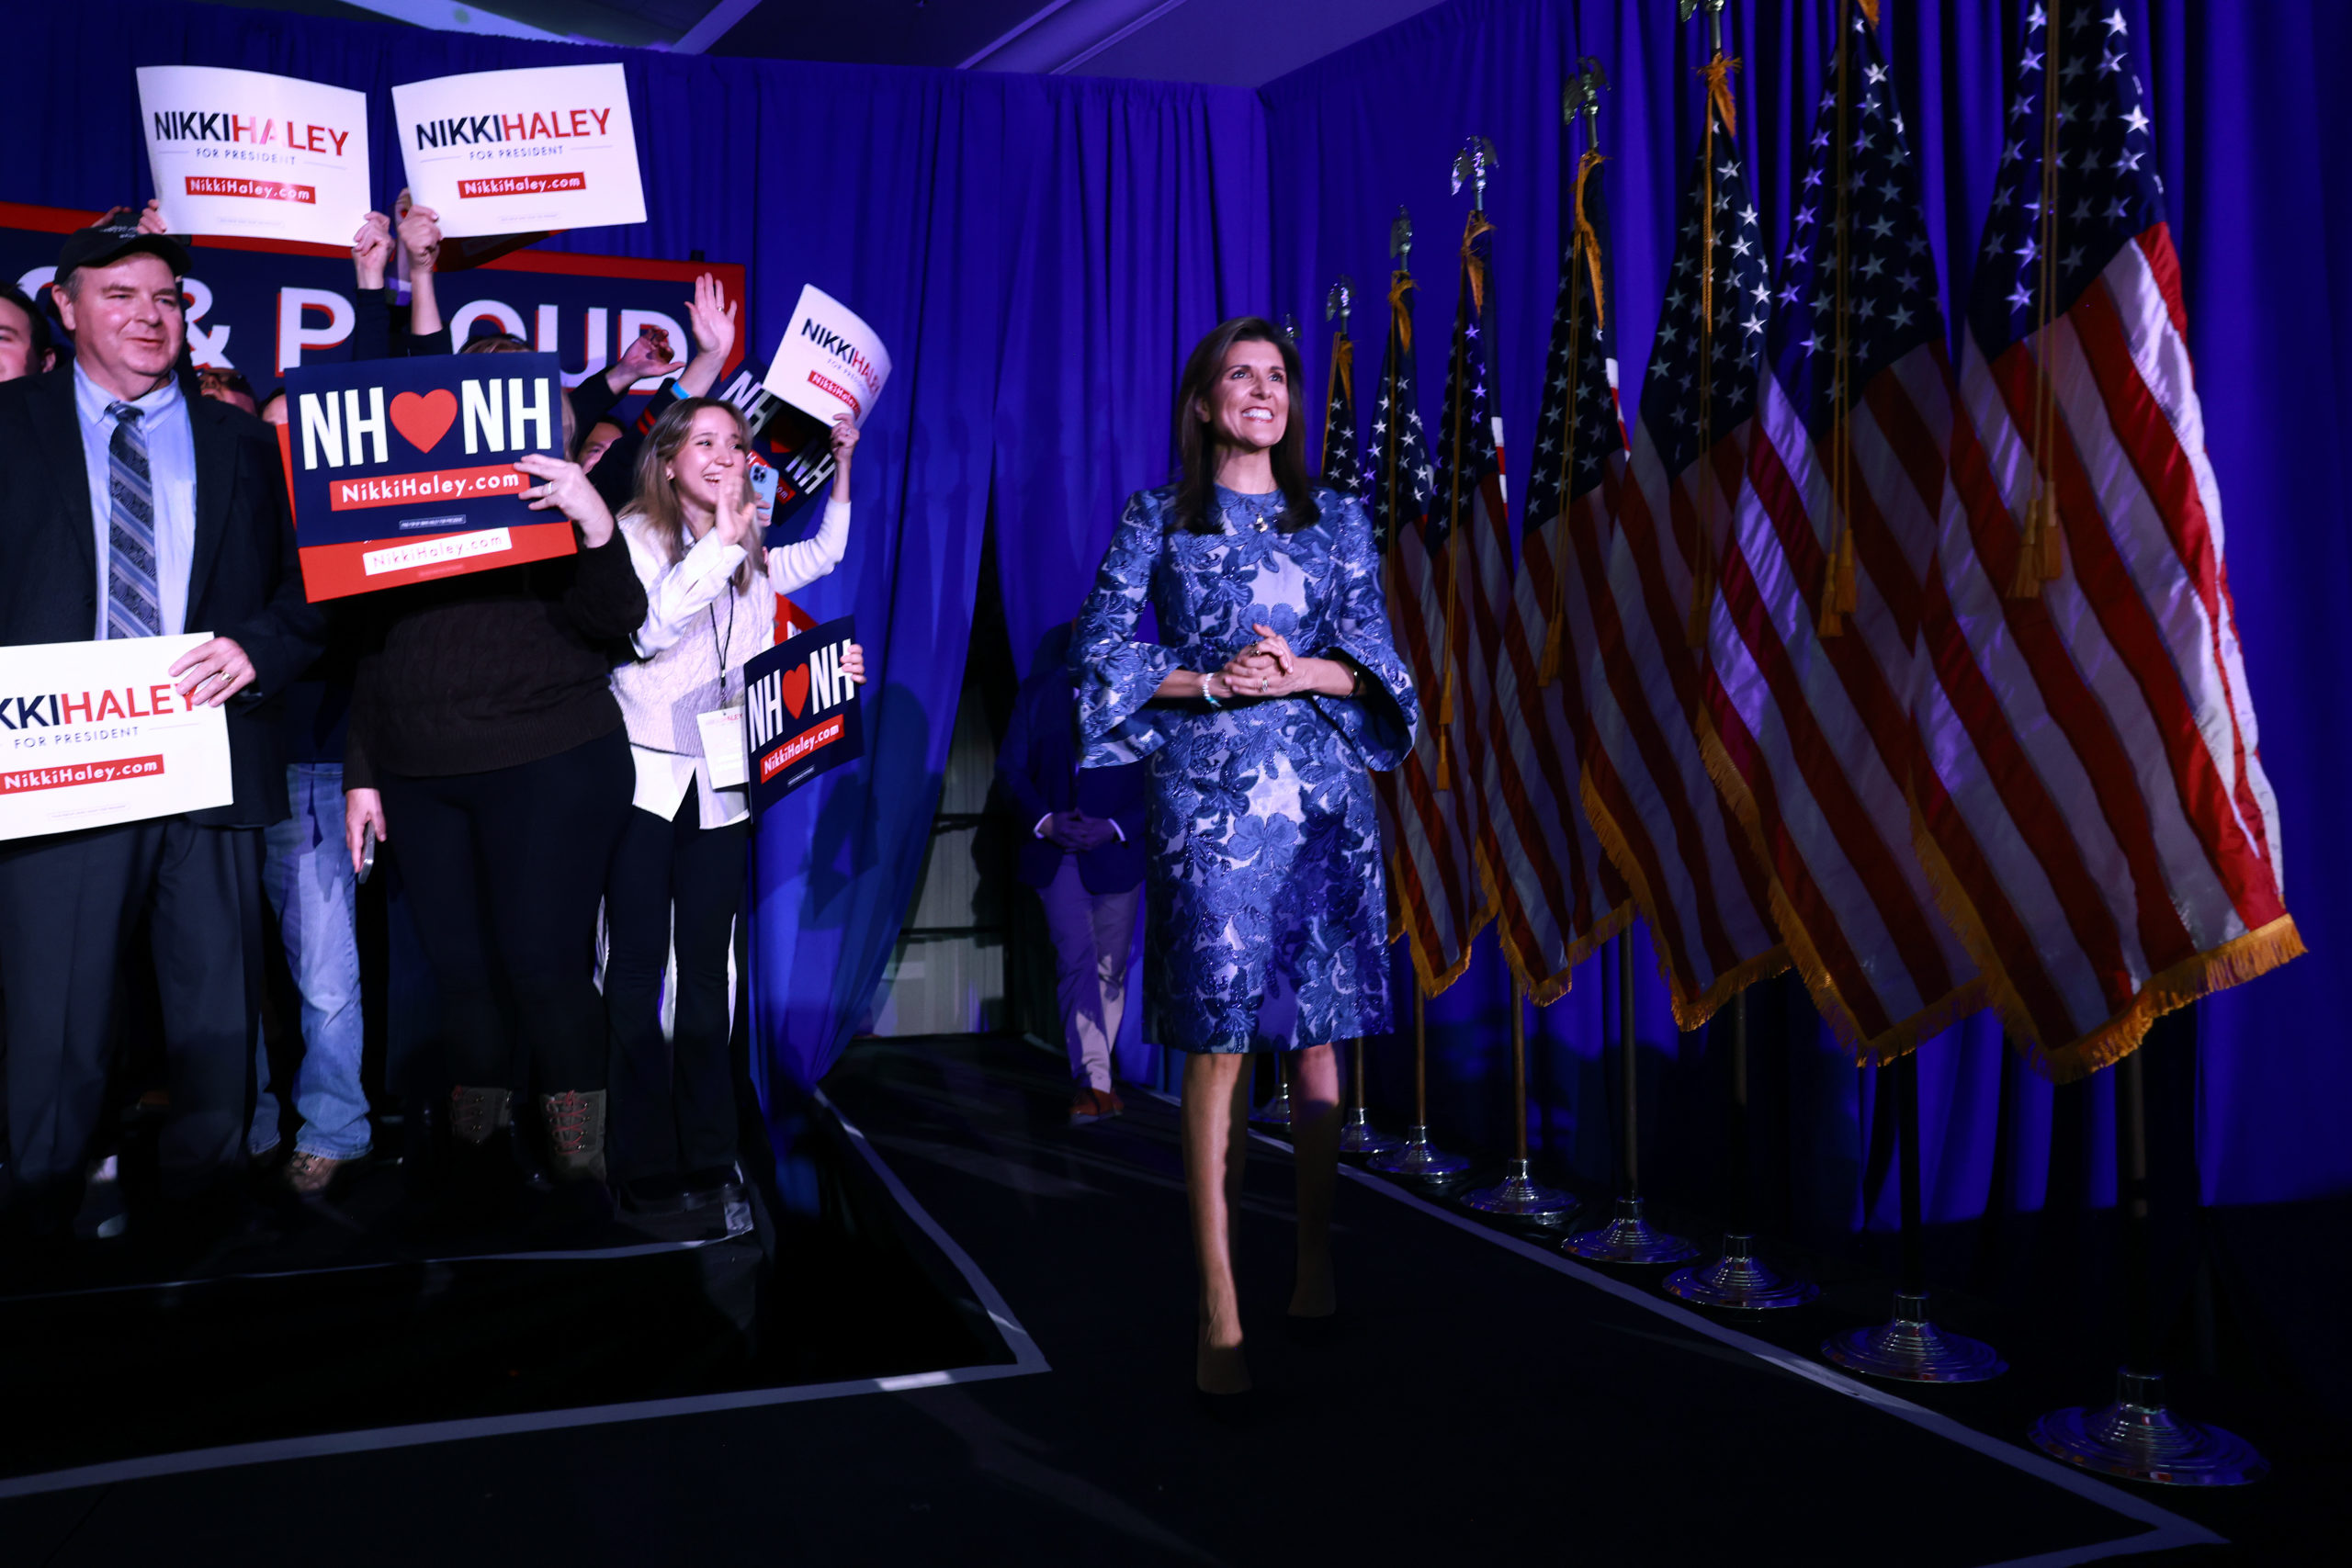 CONCORD, NEW HAMPSHIRE - JANUARY 23: Republican presidential candidate former U.N. Ambassador Nikki Haley takes the stage at her primary night rally at the Grappone Conference Center on January 23, 2024 in Concord, New Hampshire. New Hampshire voters cast their ballots in their state's primary election today. With Florida Governor Ron DeSantis dropping out of the race Sunday, former President Donald Trump and former UN Ambassador Nikki Haley are battling it out in this first-in-the-nation primary. (Photo by Joe Raedle/Getty Images)